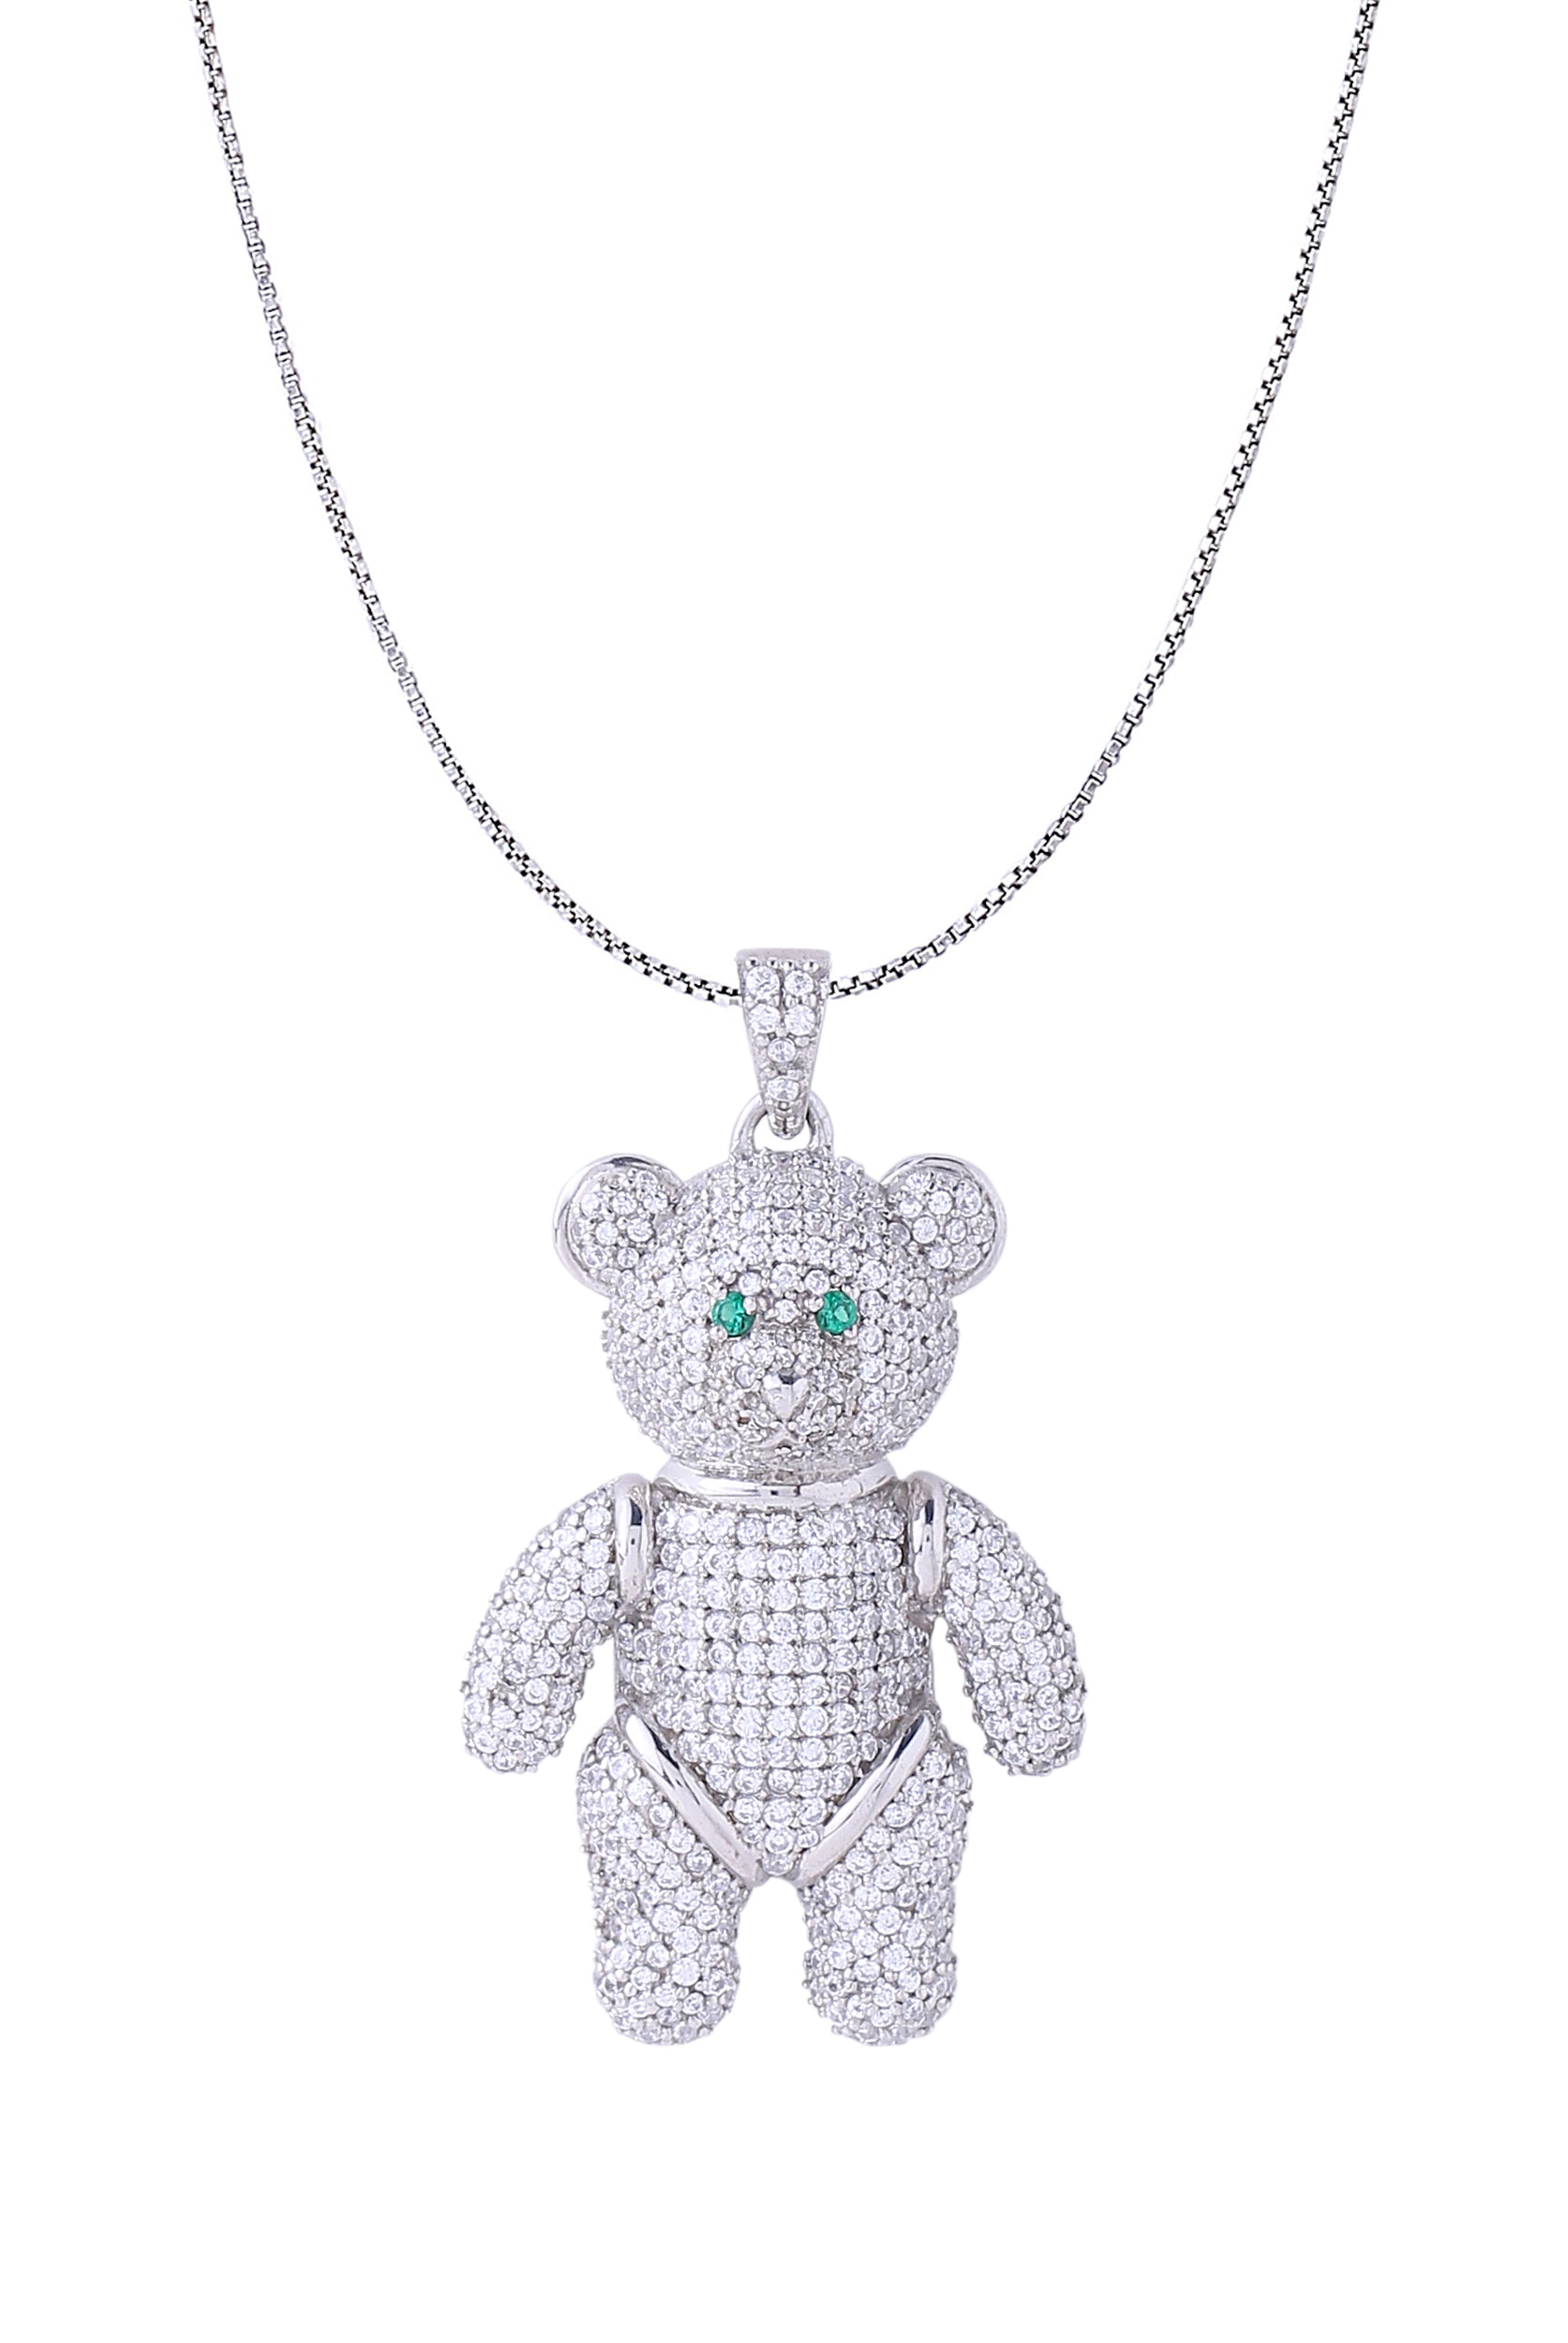 White Gold Color Teddy Pendant Made of 925 Sterling Silver Material with 20 Inch Long Silver Chain